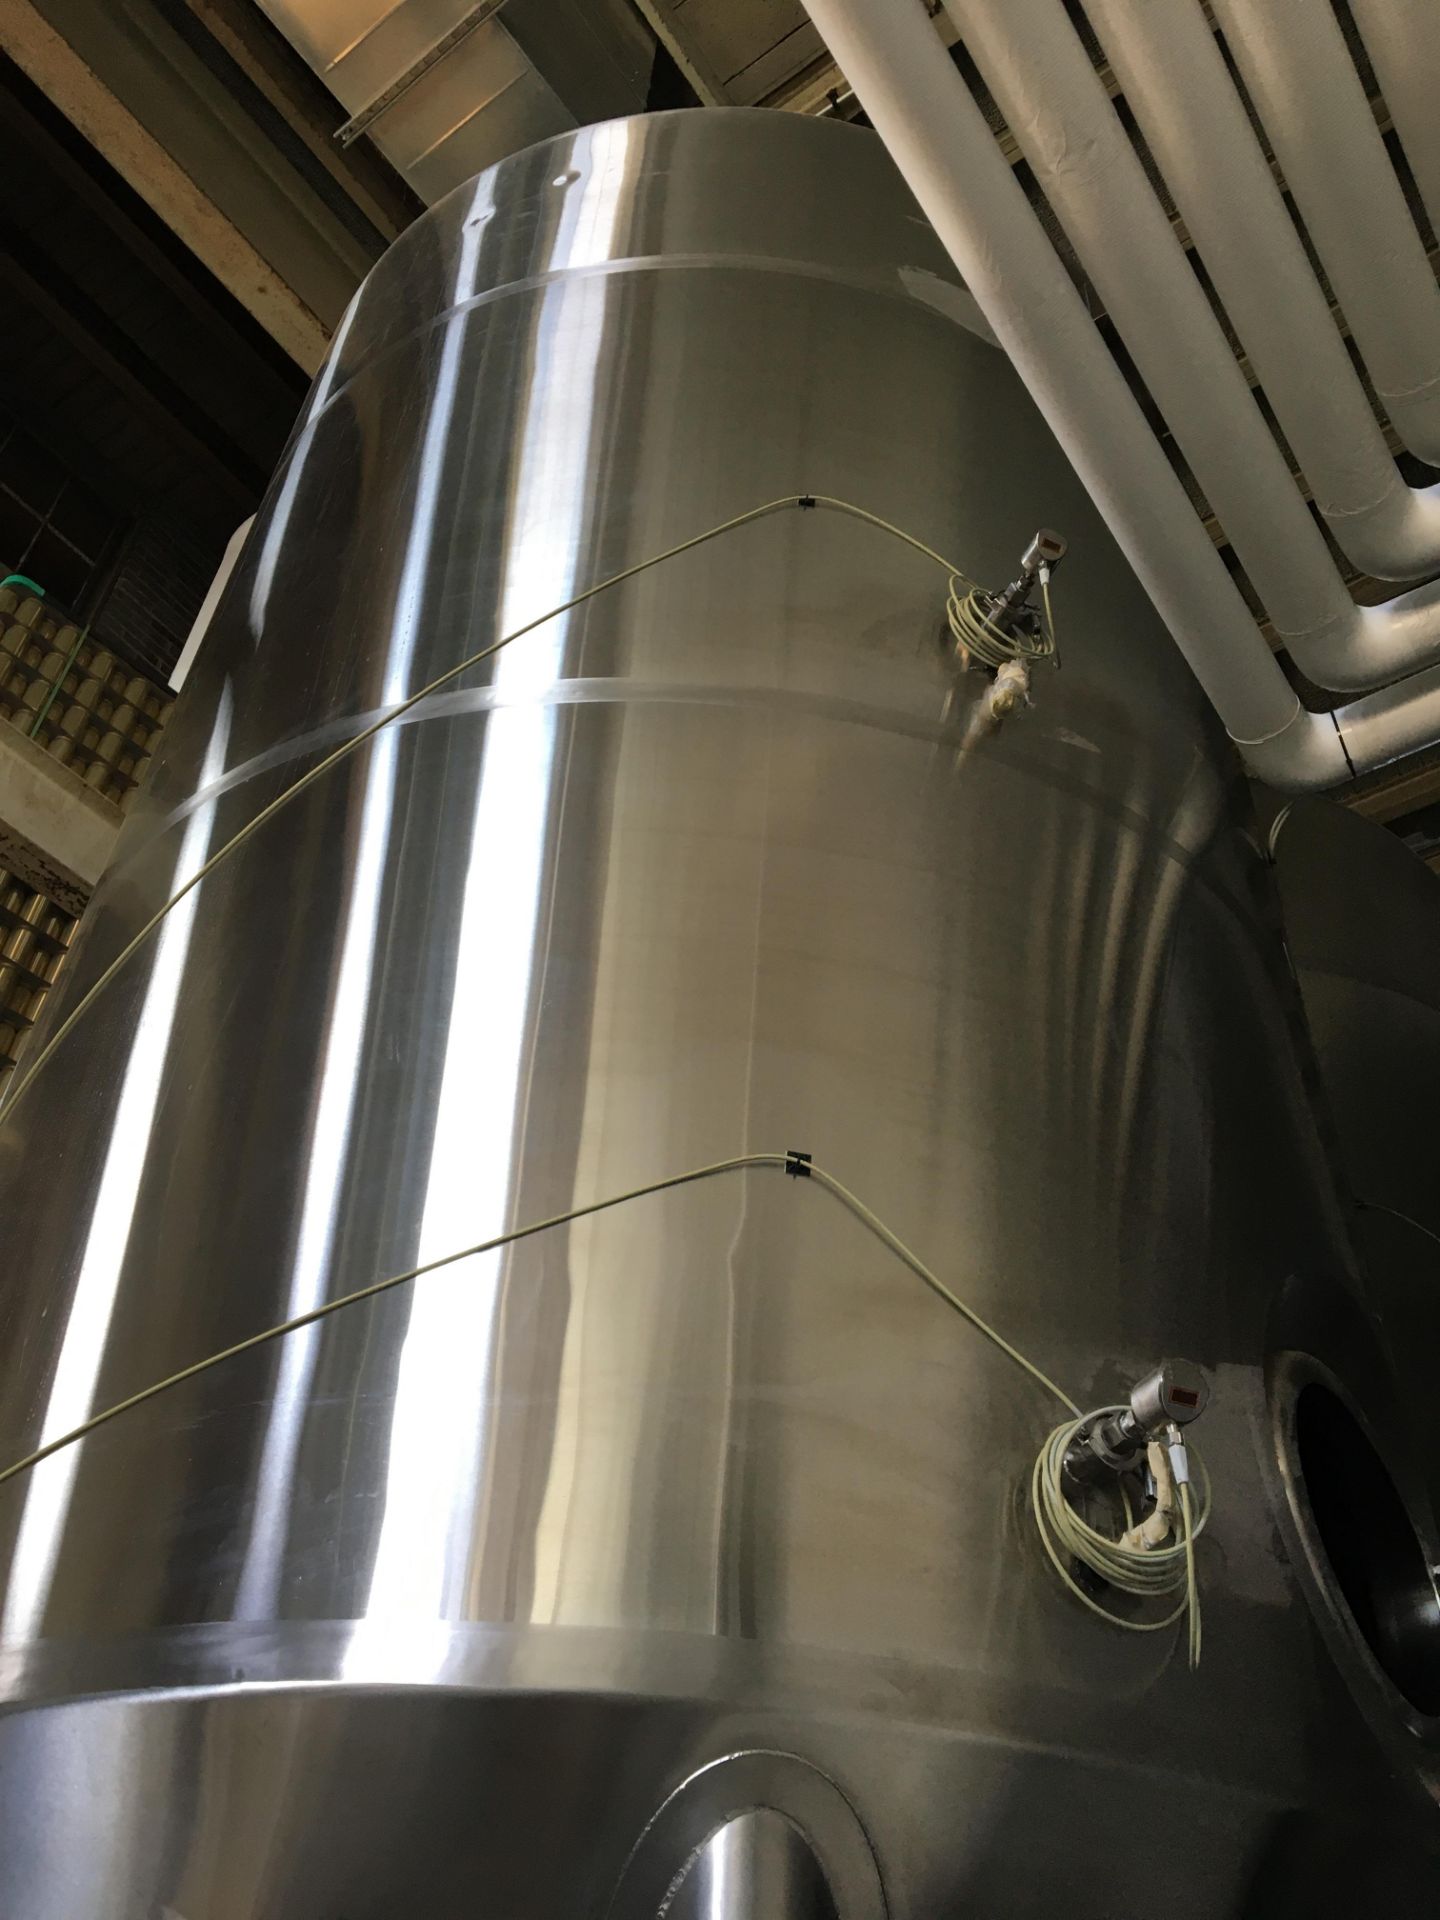 80-BBL Minnetonka Fermentation Tank, Model 80-BBL, Year 2017, Stainless Steel; Vessel store wort and - Image 5 of 9